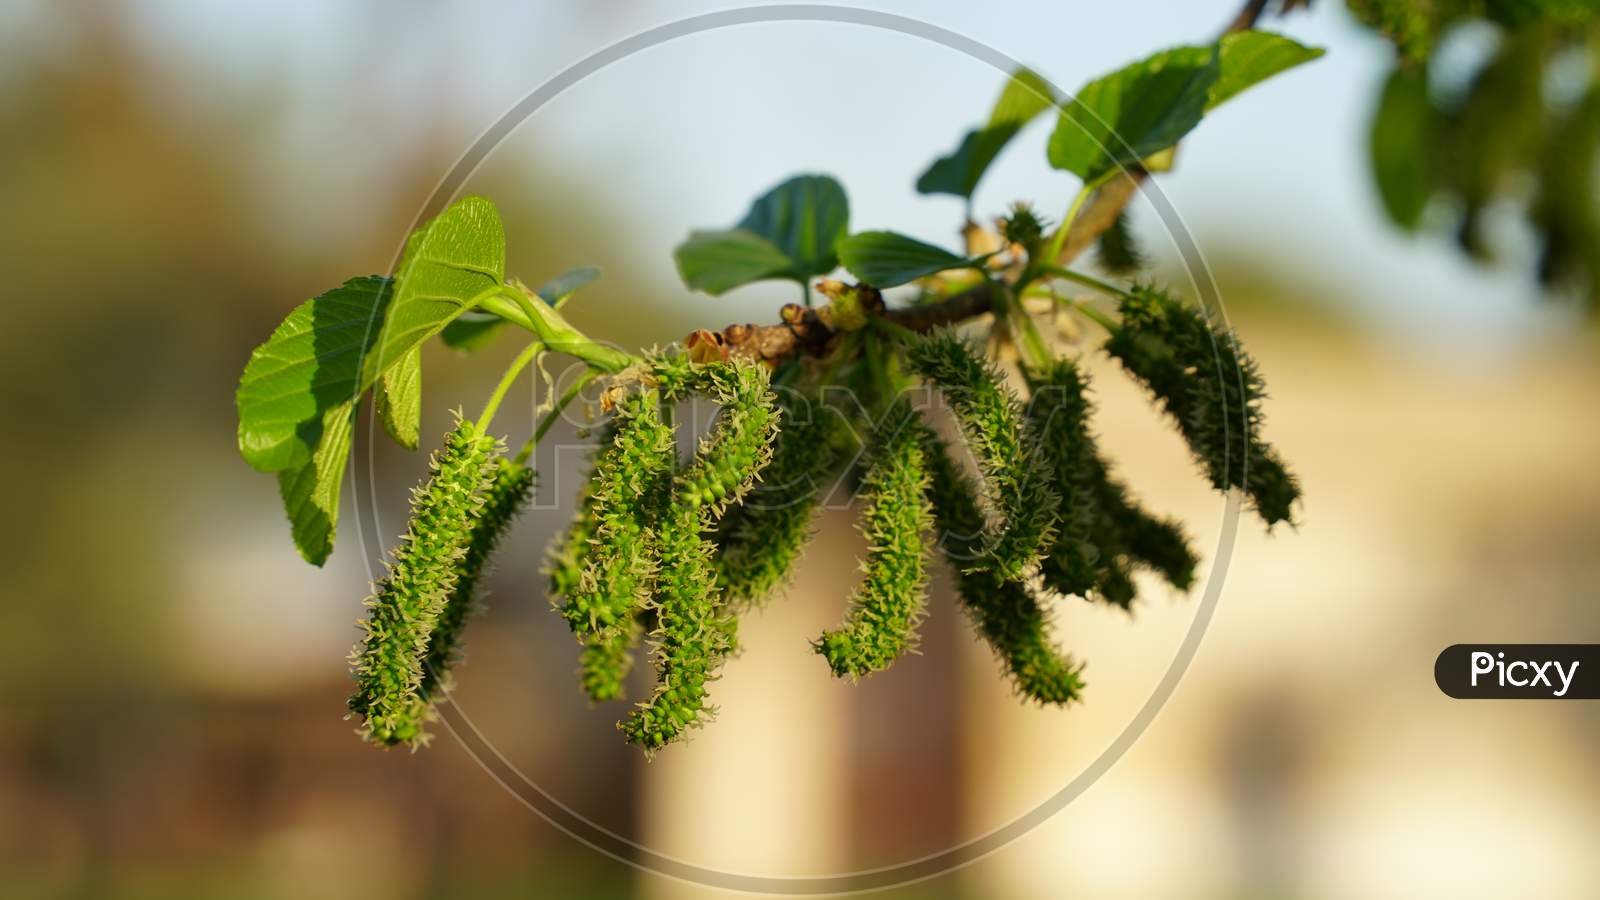 Flowering Natal Flowers Of Shatoot Or Mulberry In Air. Beautiful Long Unripe Green Fruits Flower Of Mulberry Floating In Air.